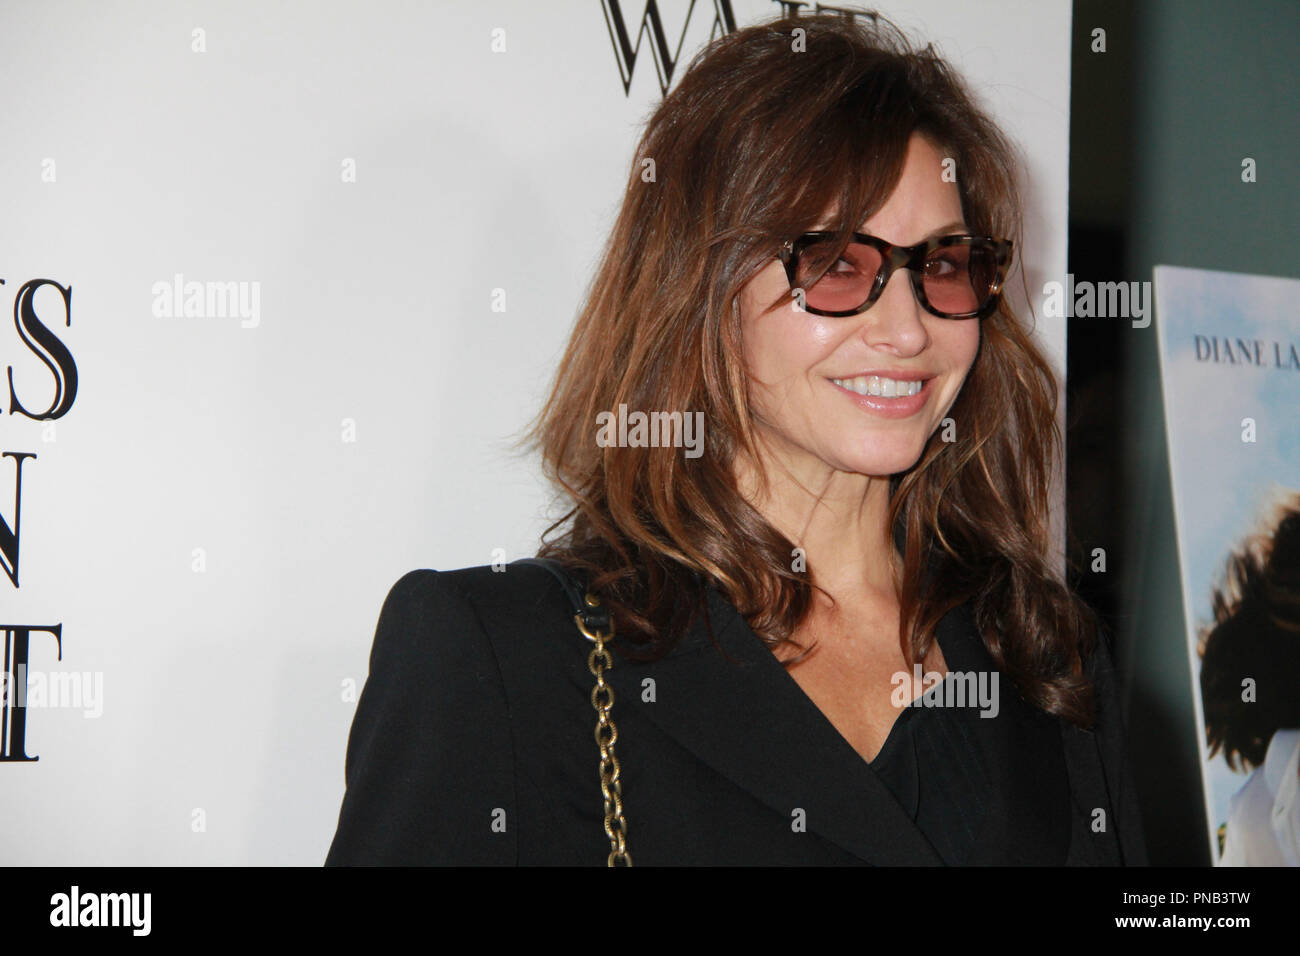 Gina Gershon  05/11/2017 The Los Angeles Special Screening of 'Paris Can Wait' held at the Pacific Design Center Silver Screen Theatre in West Hollywood, CA Photo by Izumi Hasegawa / HNW / PictureLux Stock Photo